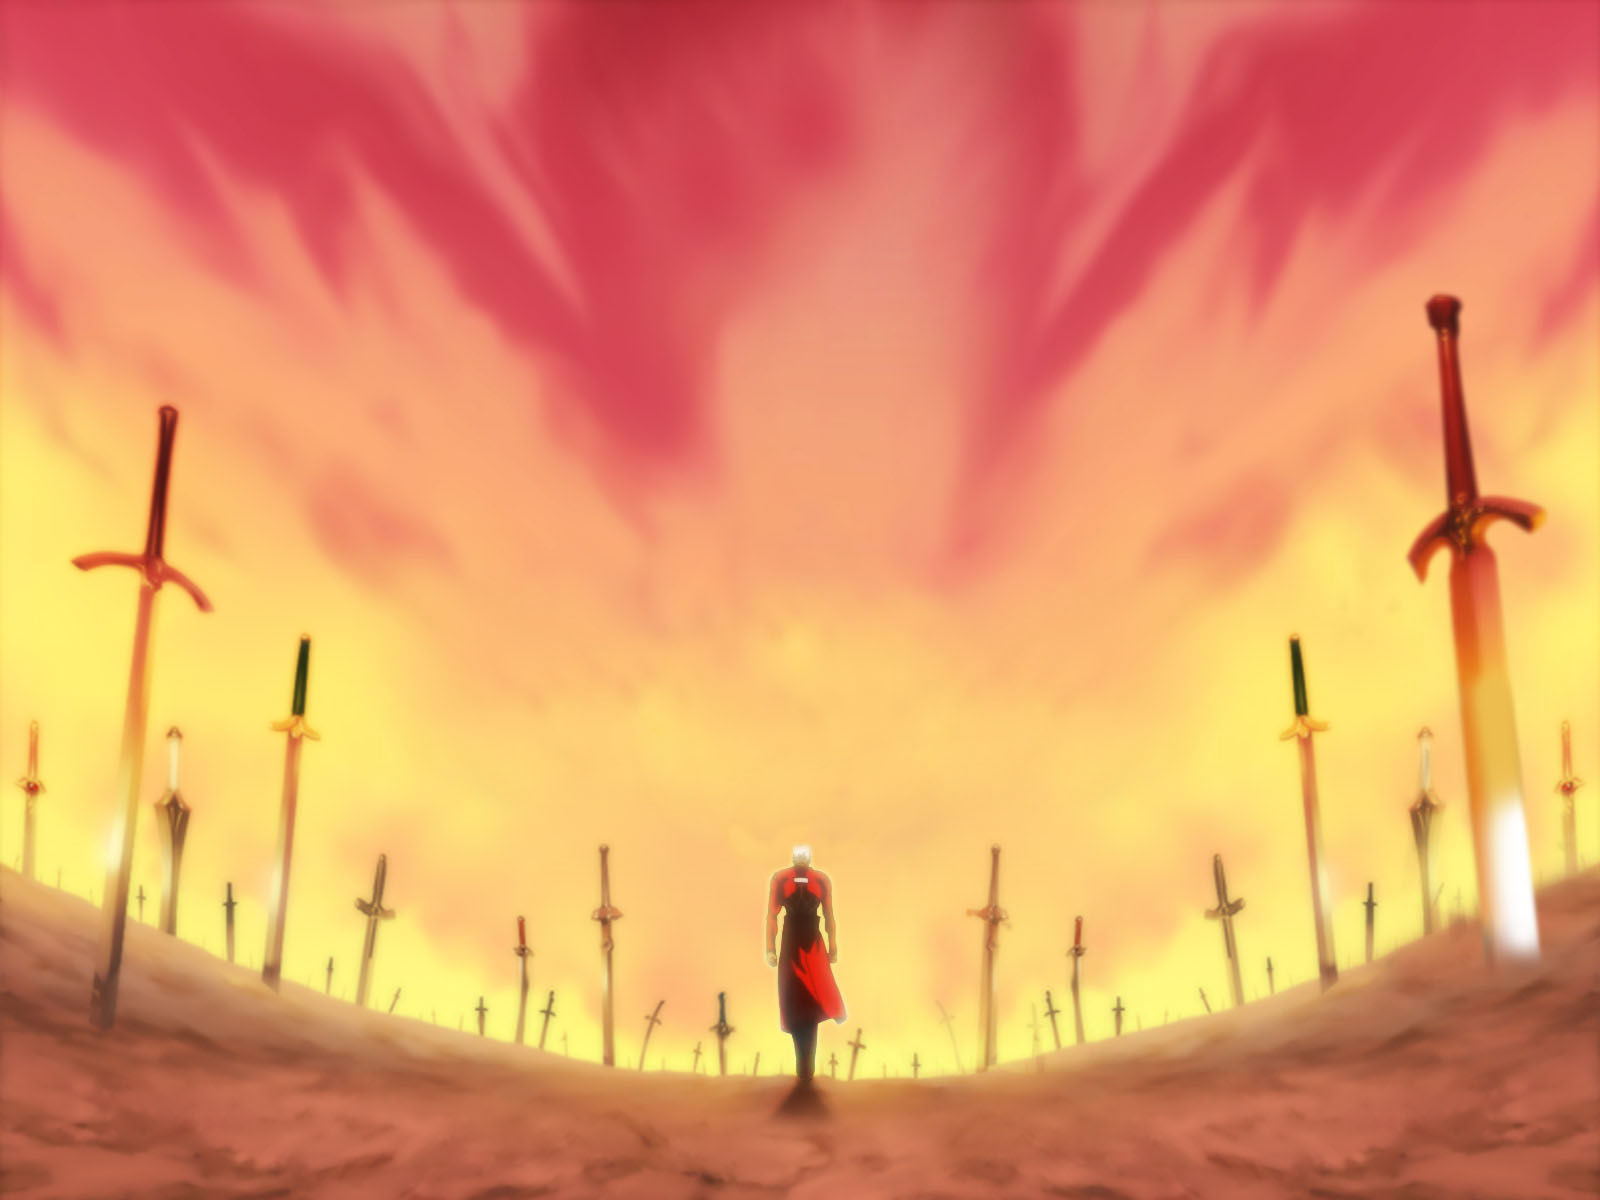 Fate/Stay Night: Unlimited Blade Works Art